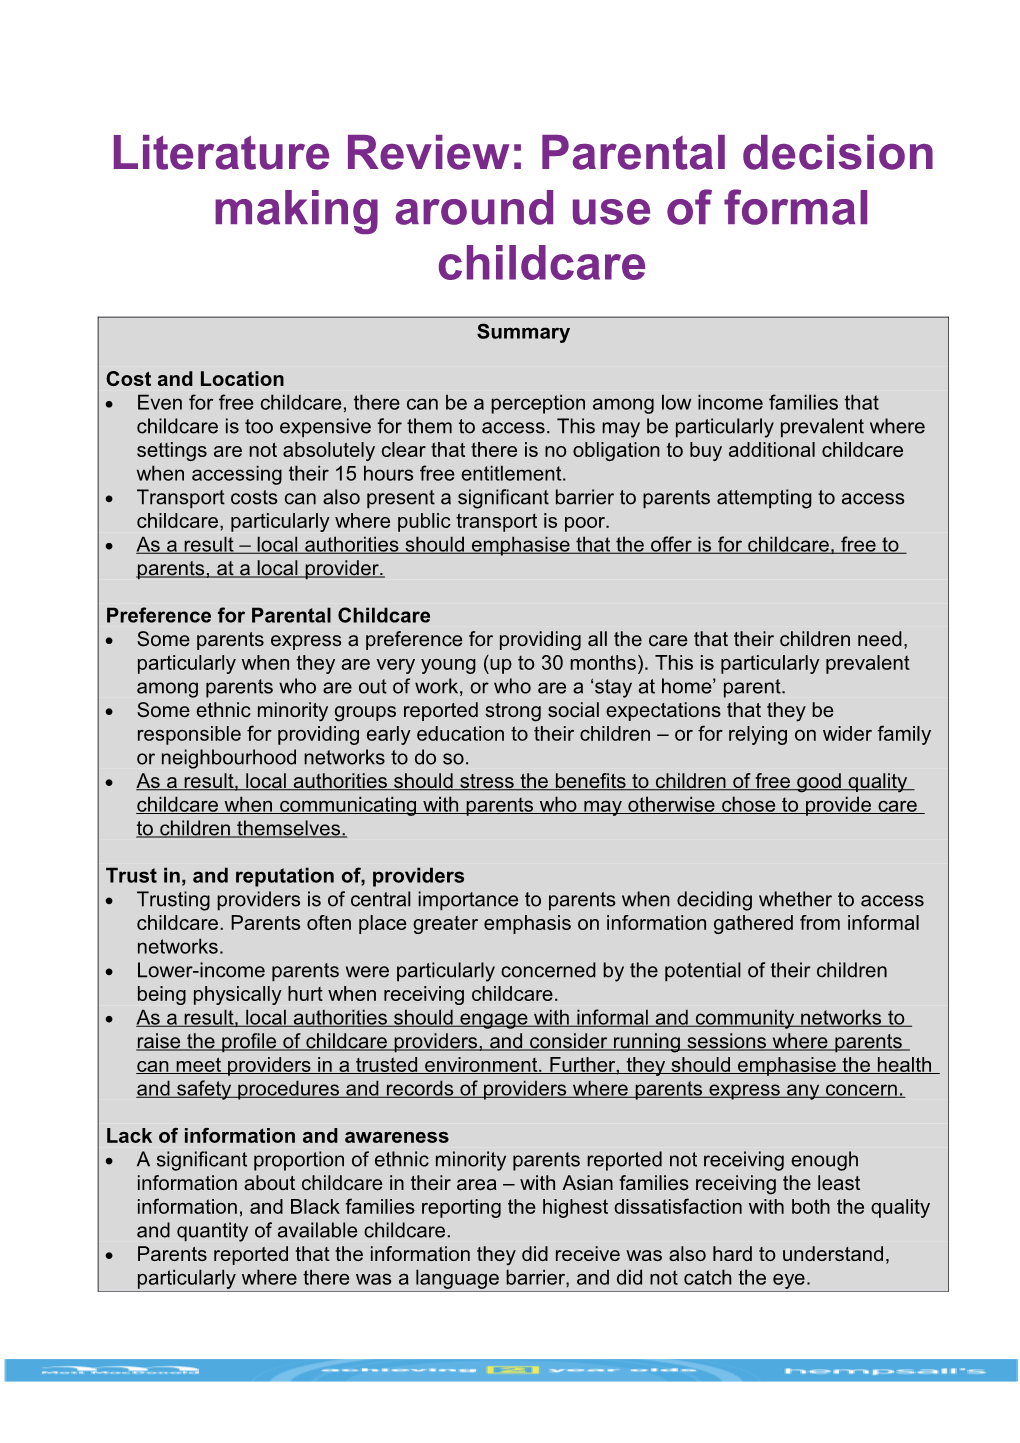 Literature Review: Parental Decision Making Around Use of Formal Childcare